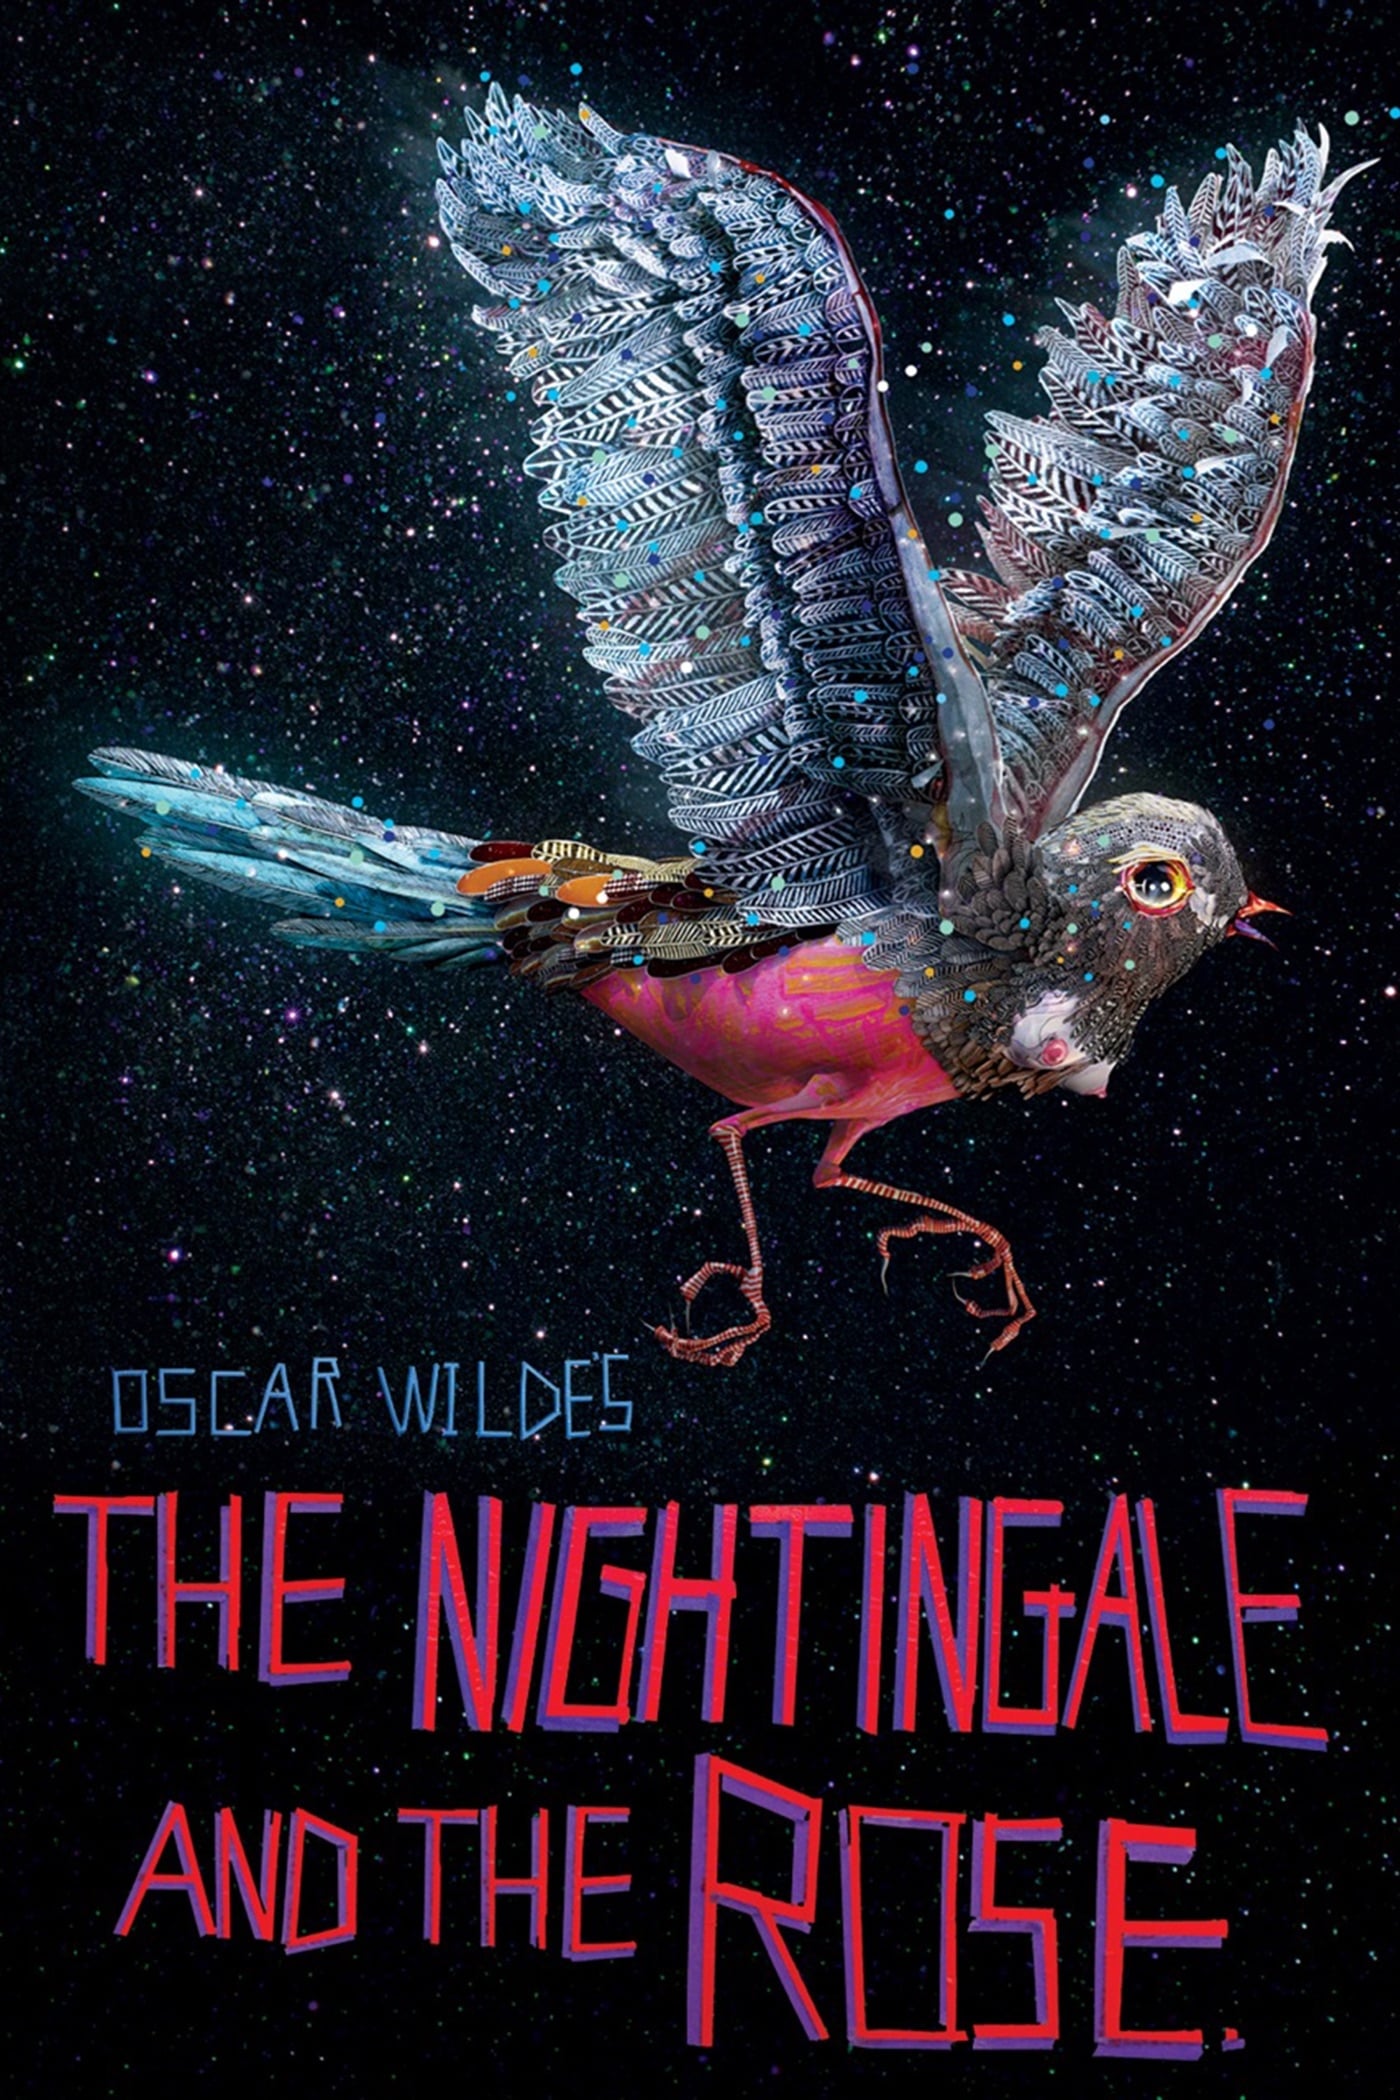 Oscar Wilde's the Nightingale and the Rose (2015)